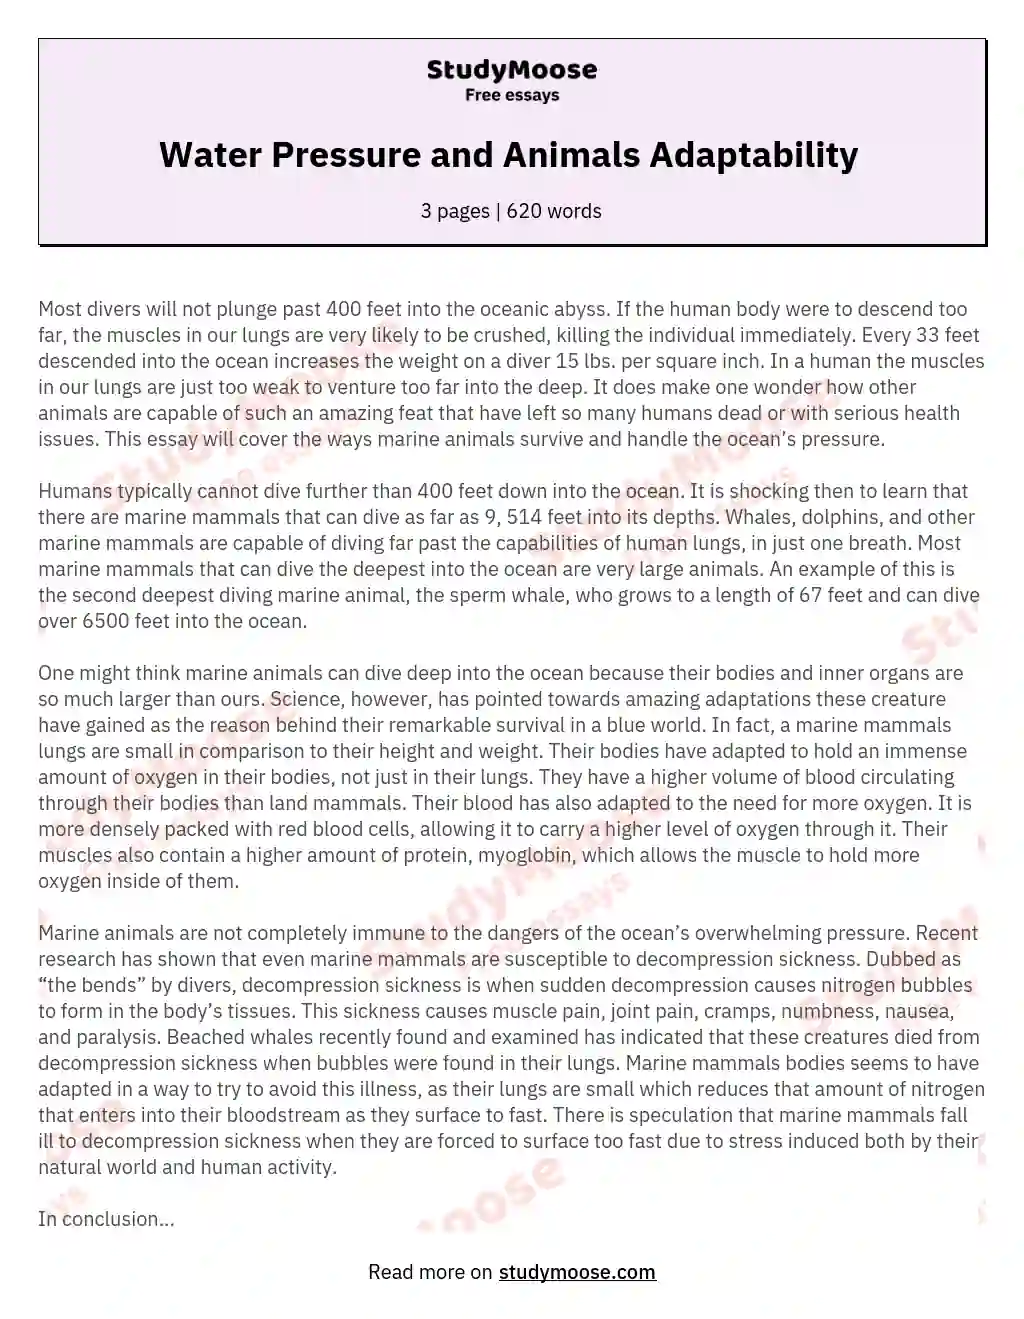 Water Pressure and Animals Adaptability  essay